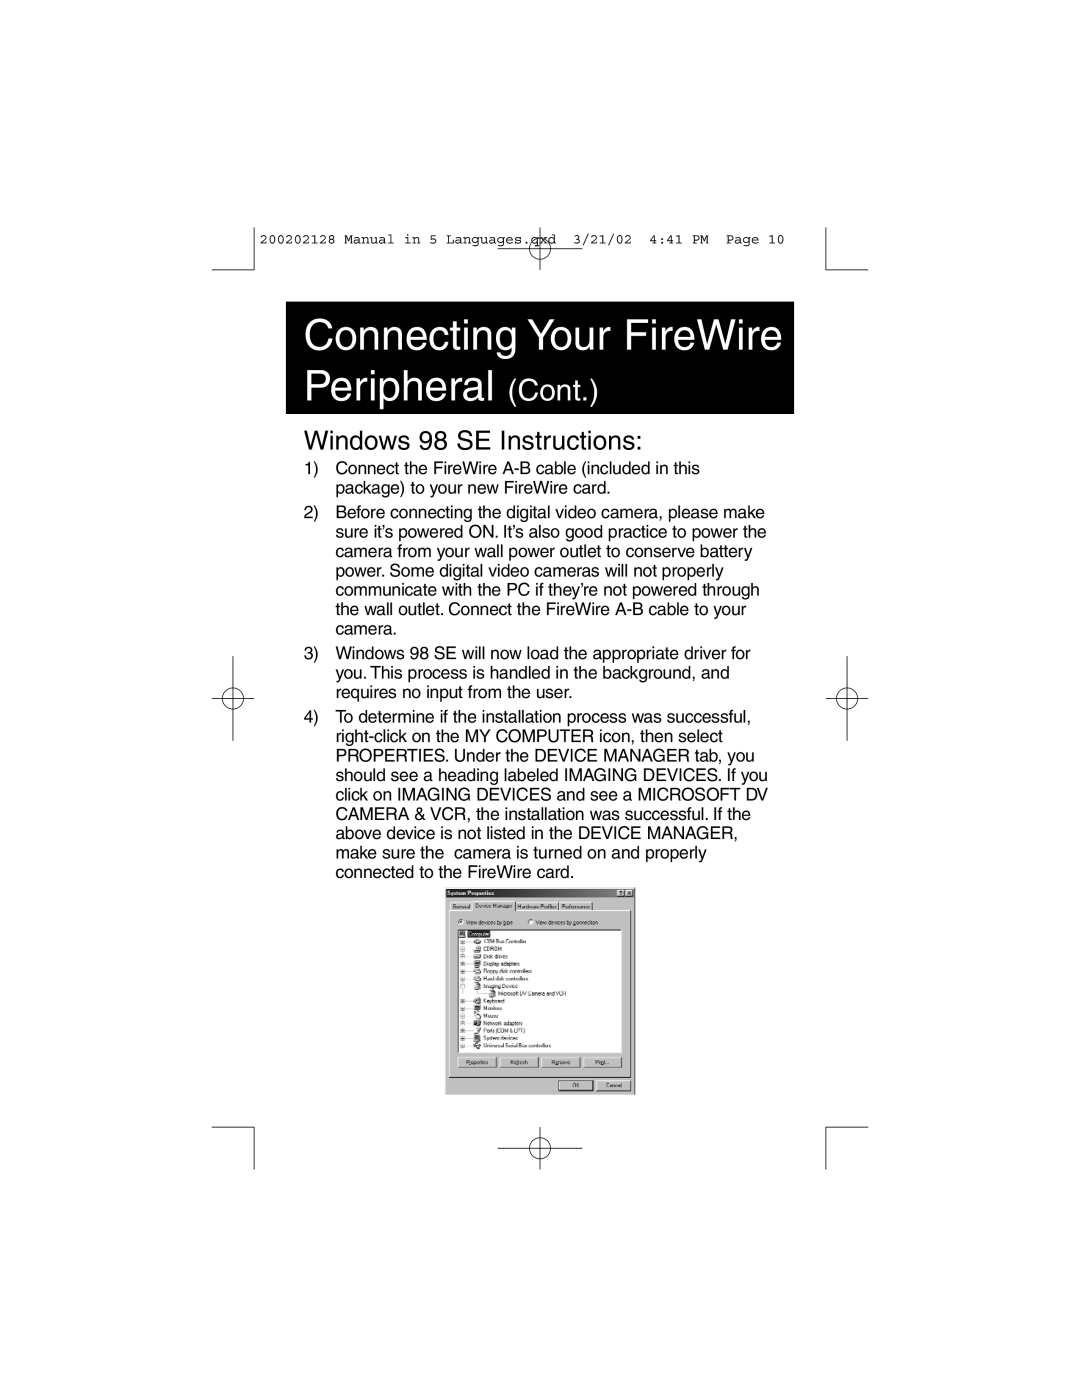 Tripp Lite F200-003-R user manual Connecting Your FireWire Peripheral Cont, Windows 98 SE Instructions 